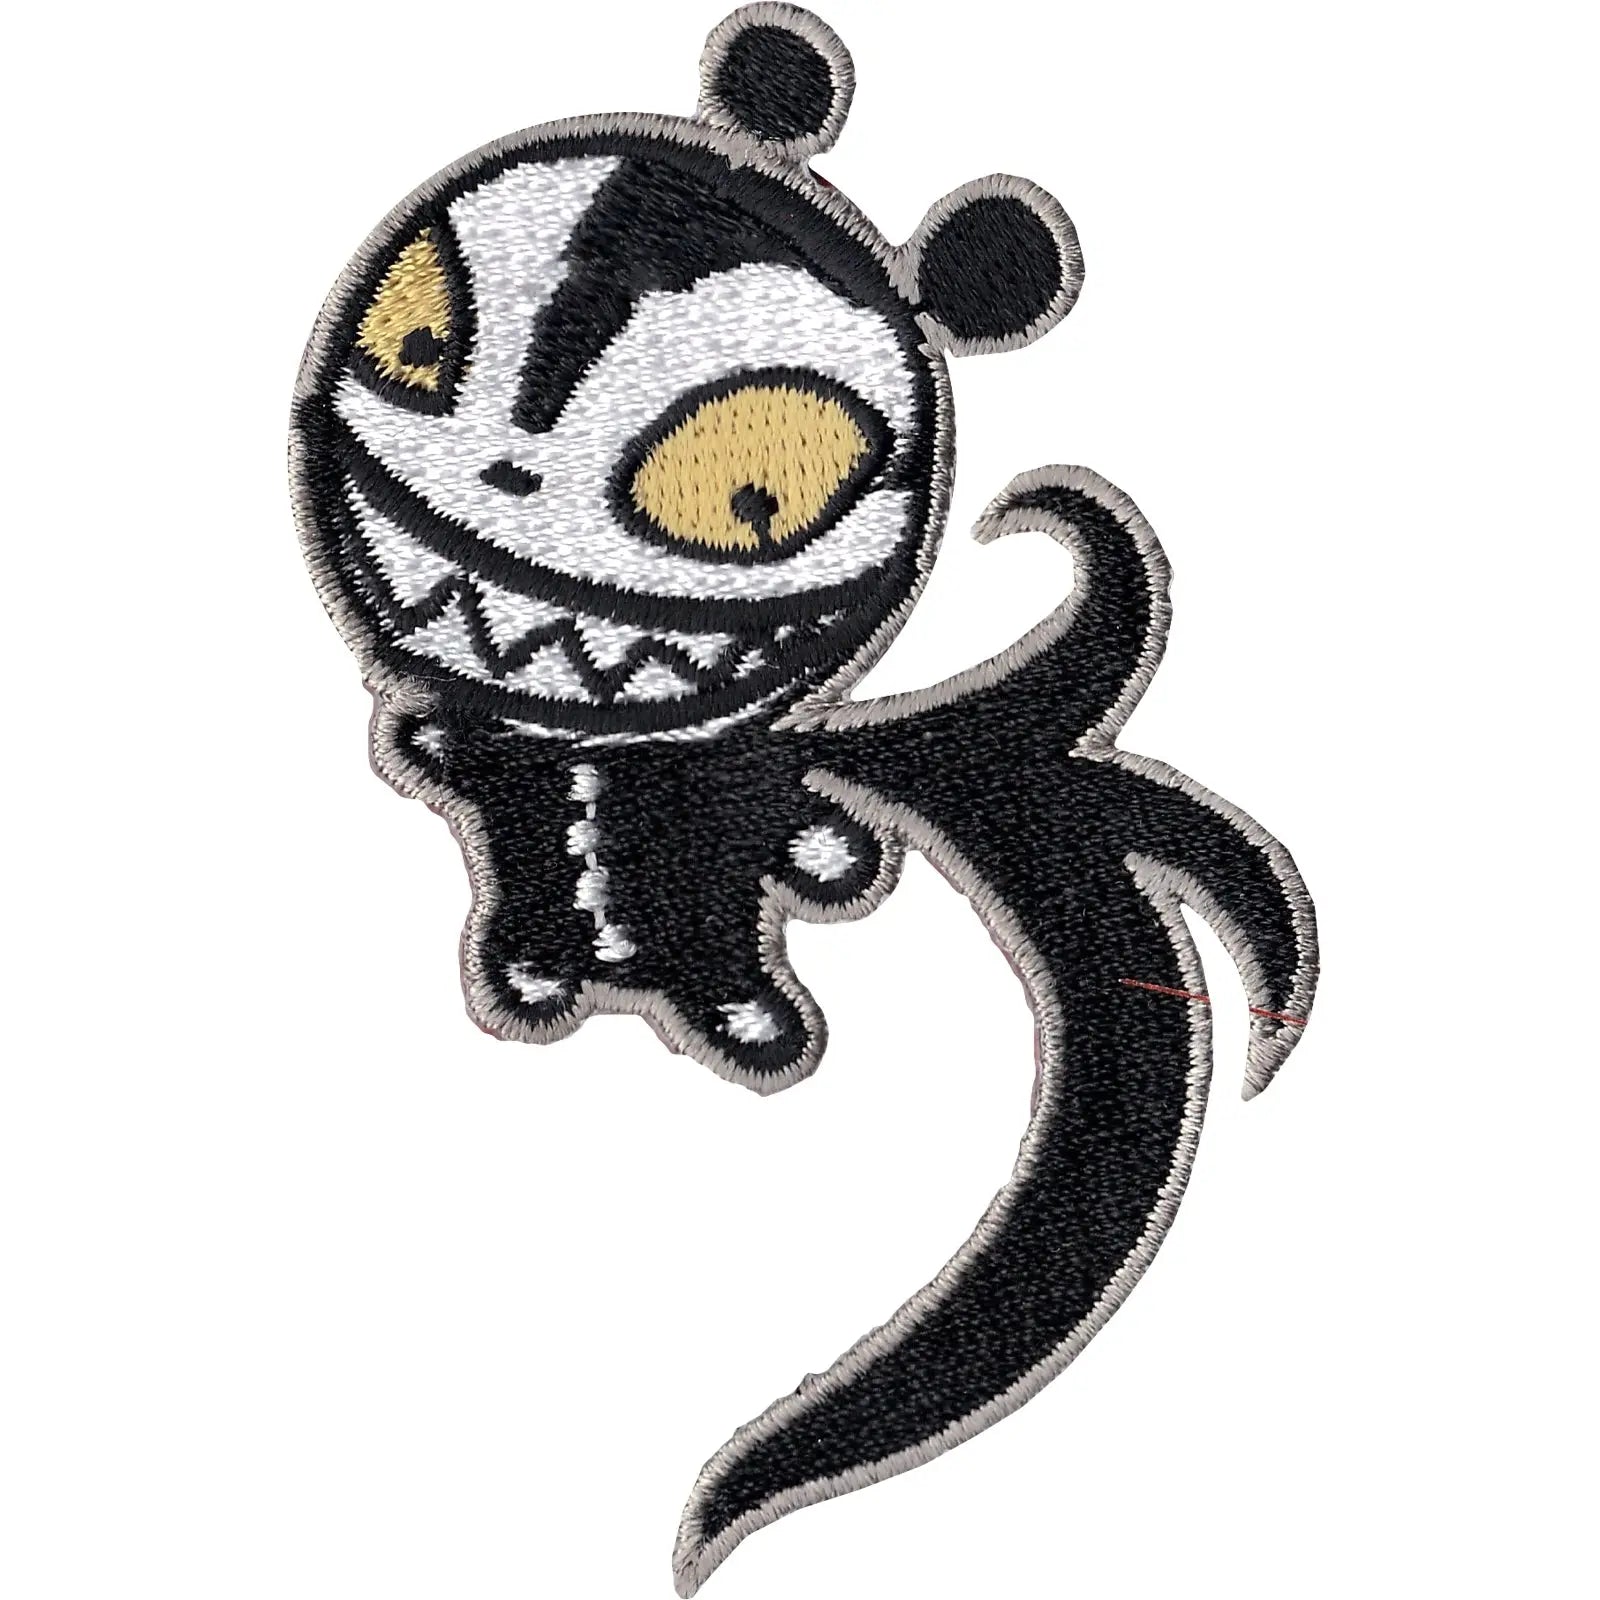 Nightmare Before Christmas Scary Doll Disney Iron On Applique Patch 